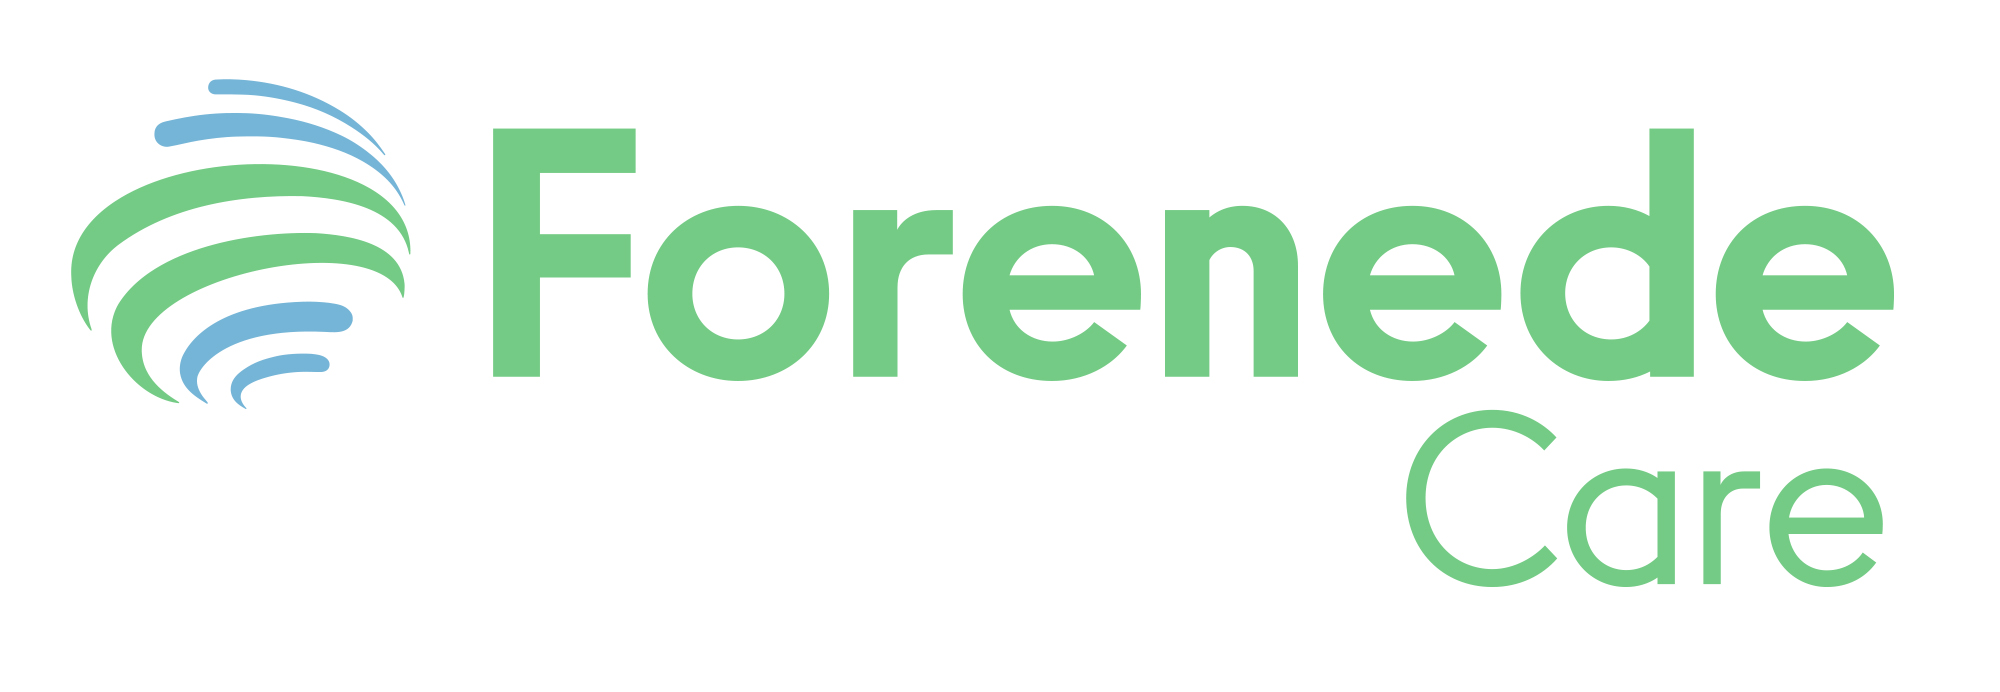 Forenede Care